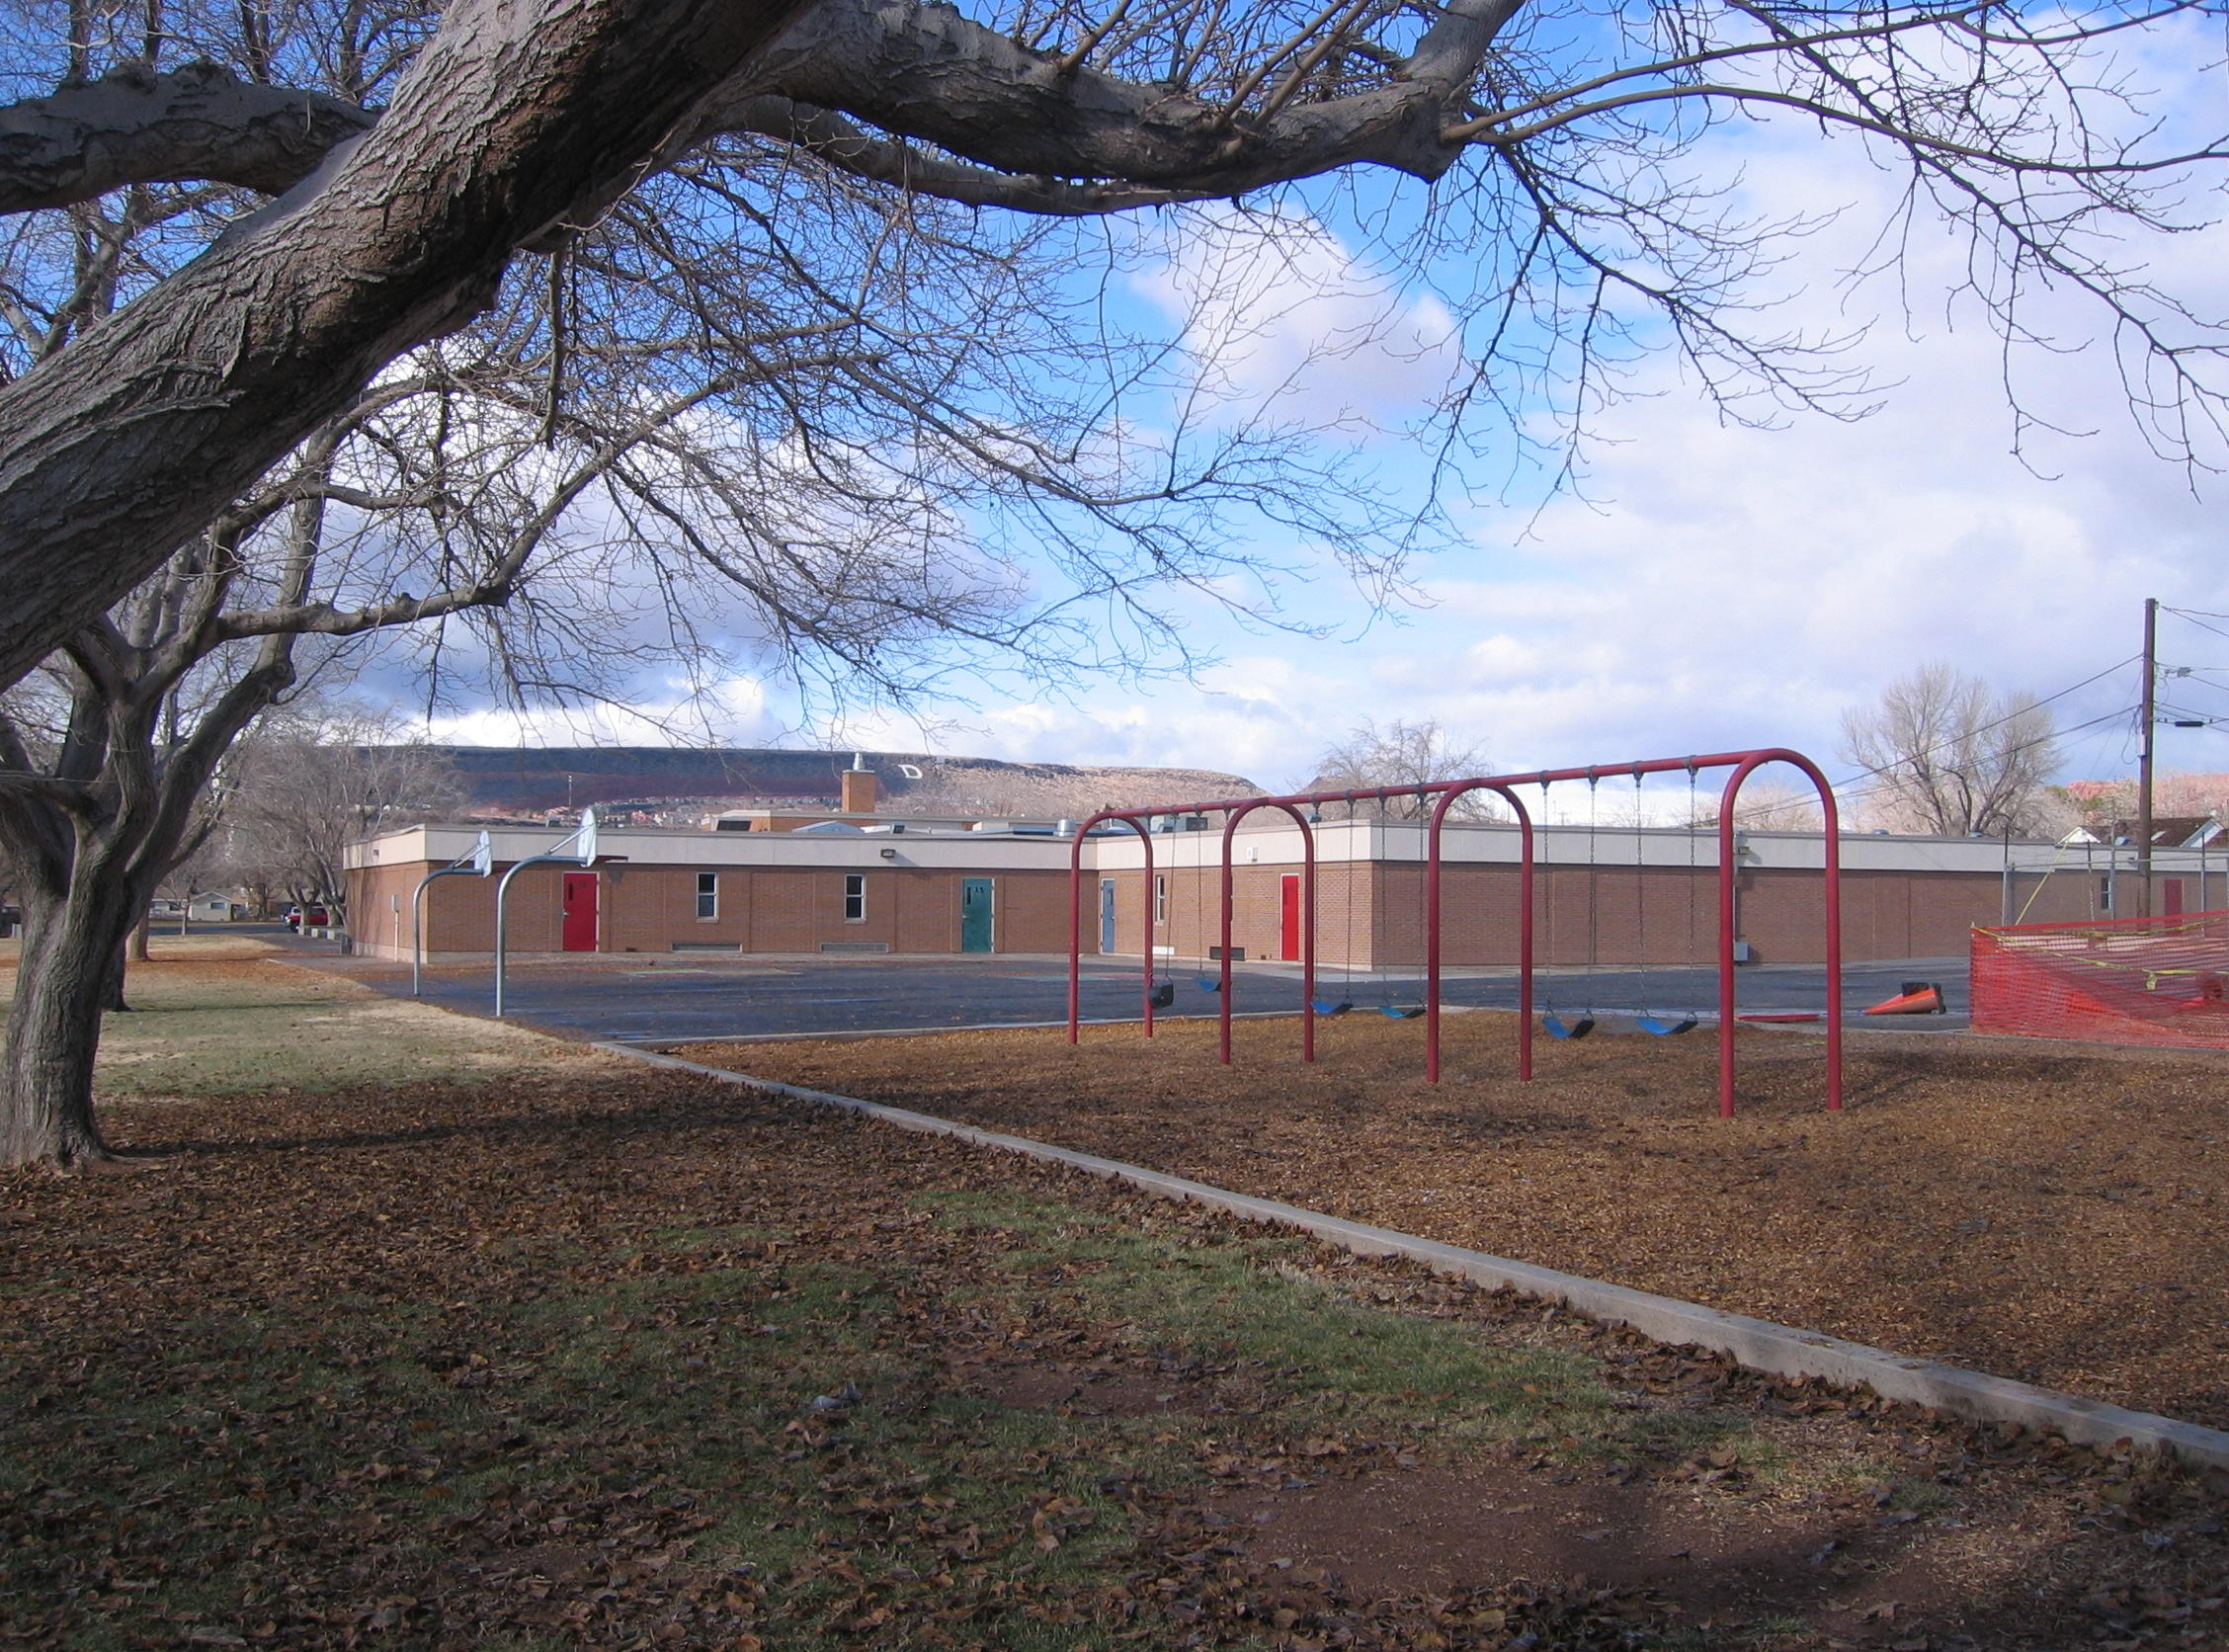 Swings and basketball courts in the southeast corner of East Elementary School